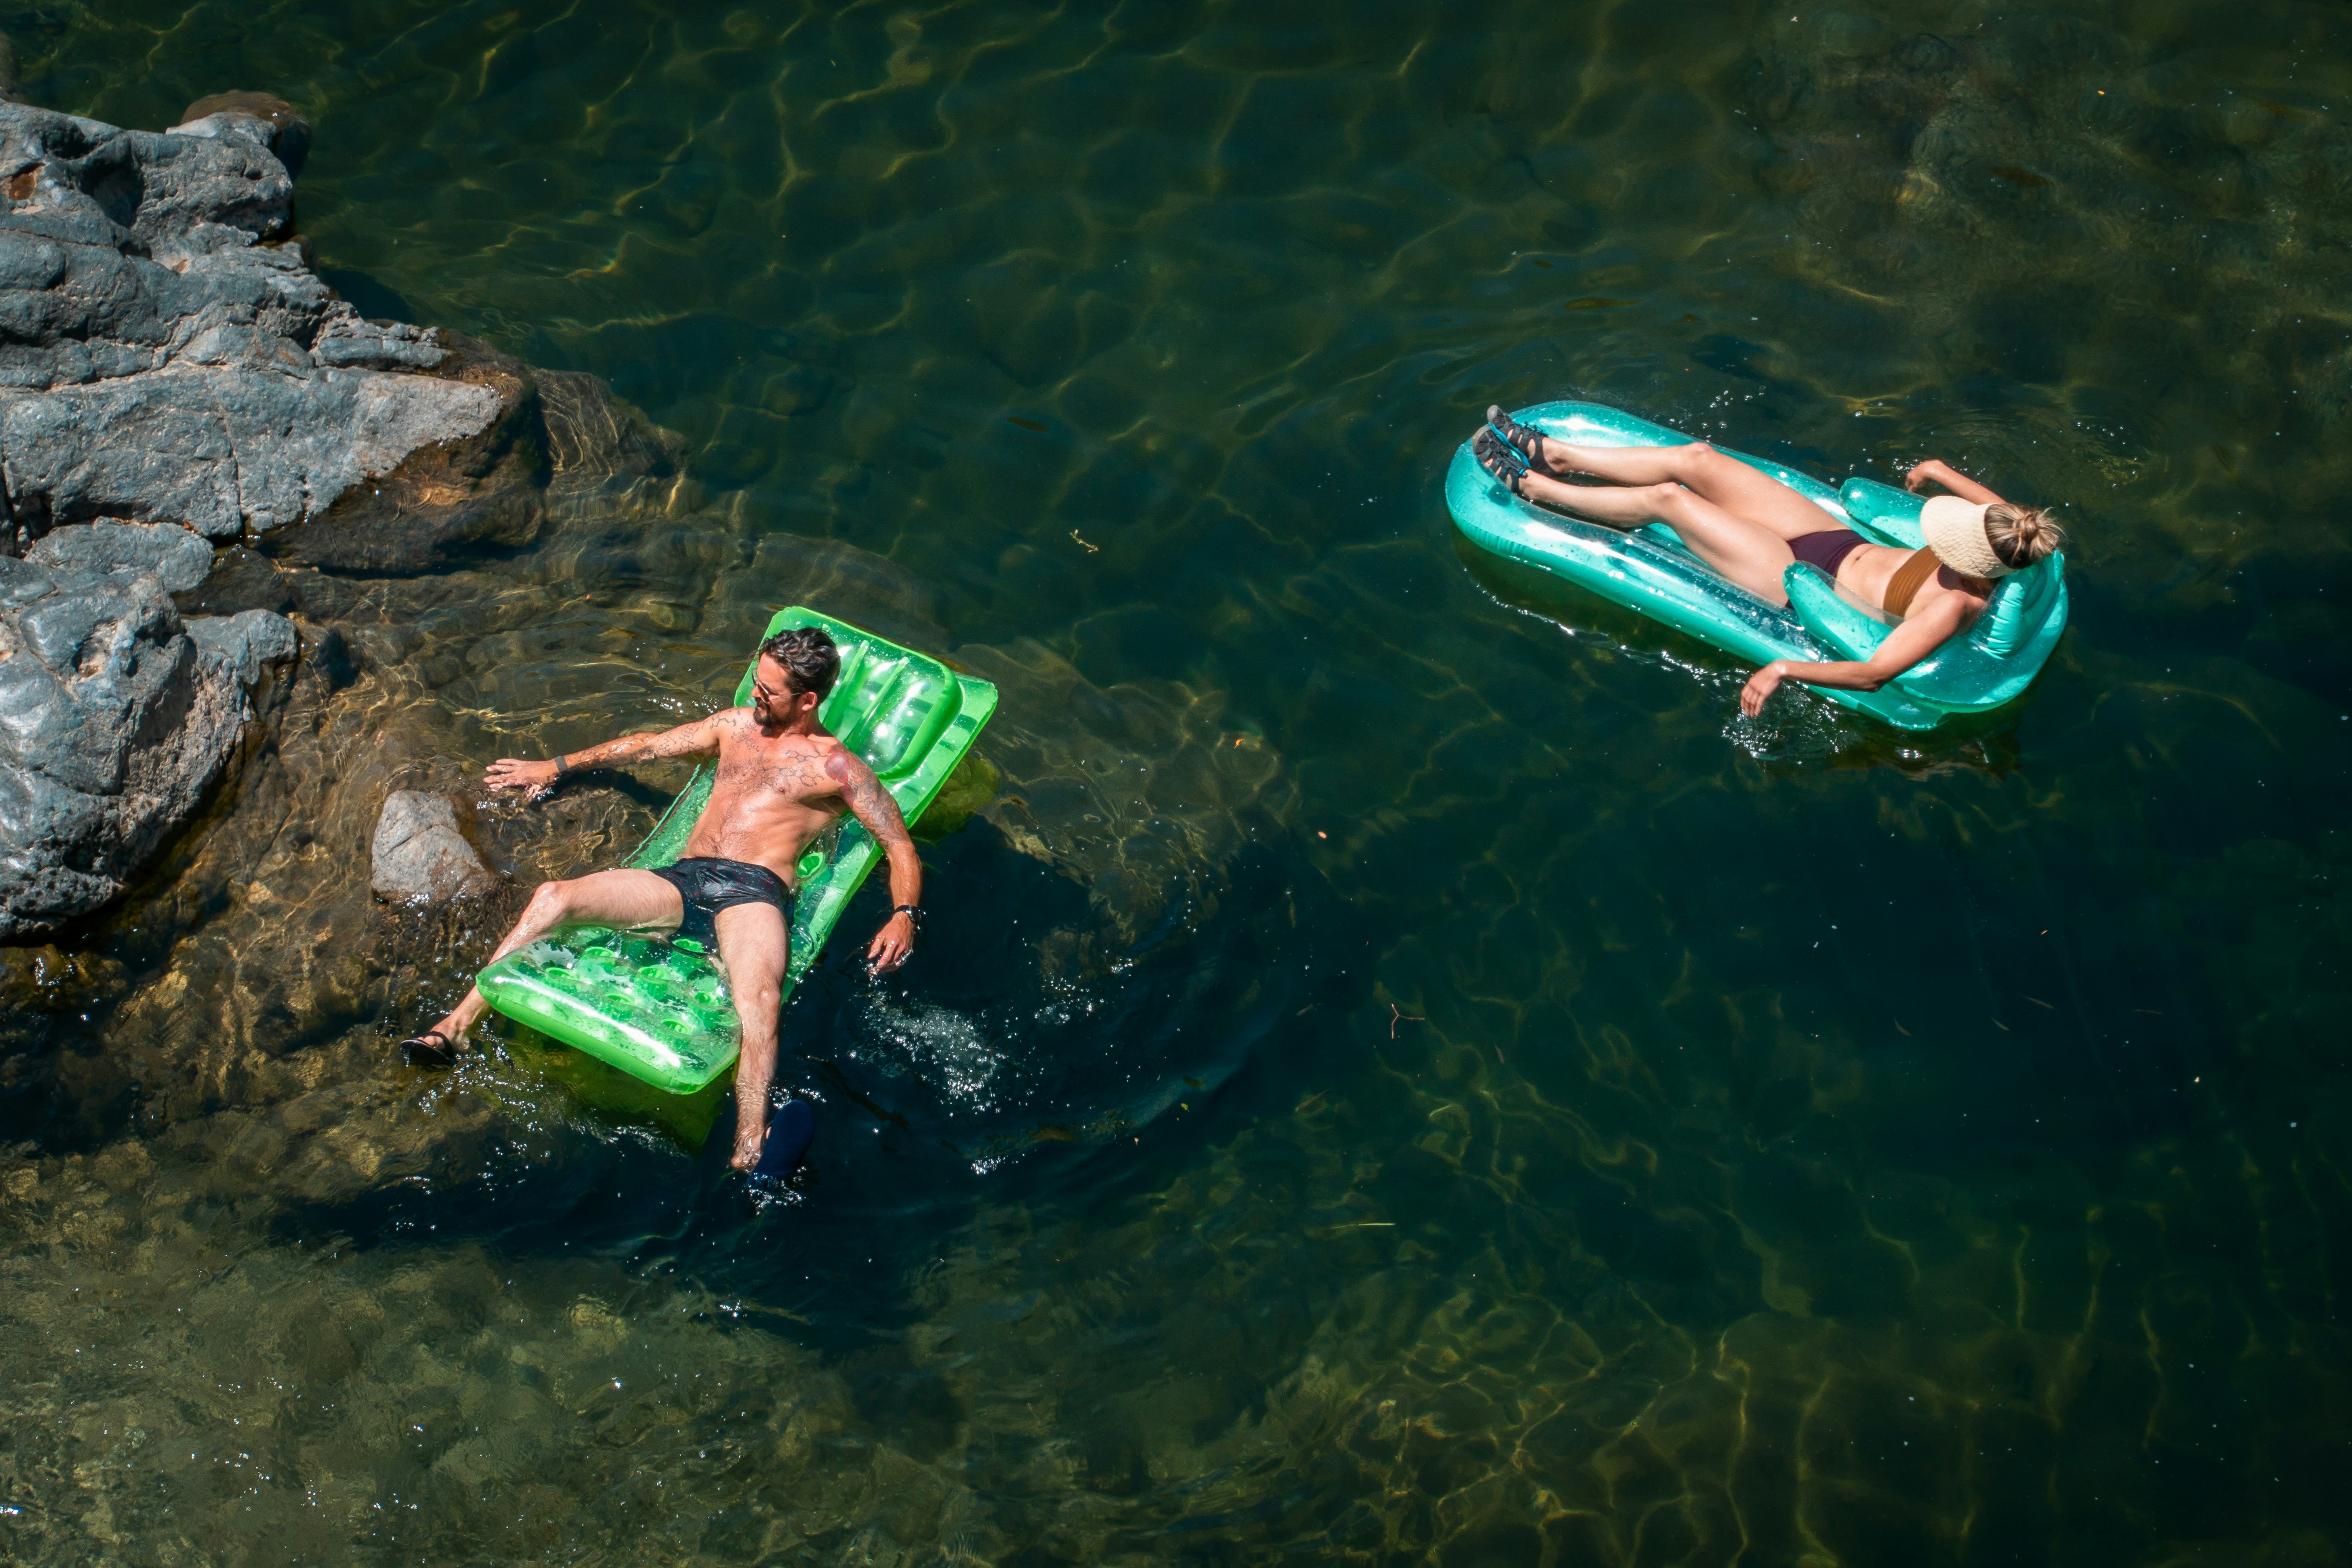 2 women in green and black bikini lying on green inflatable float on water during daytime